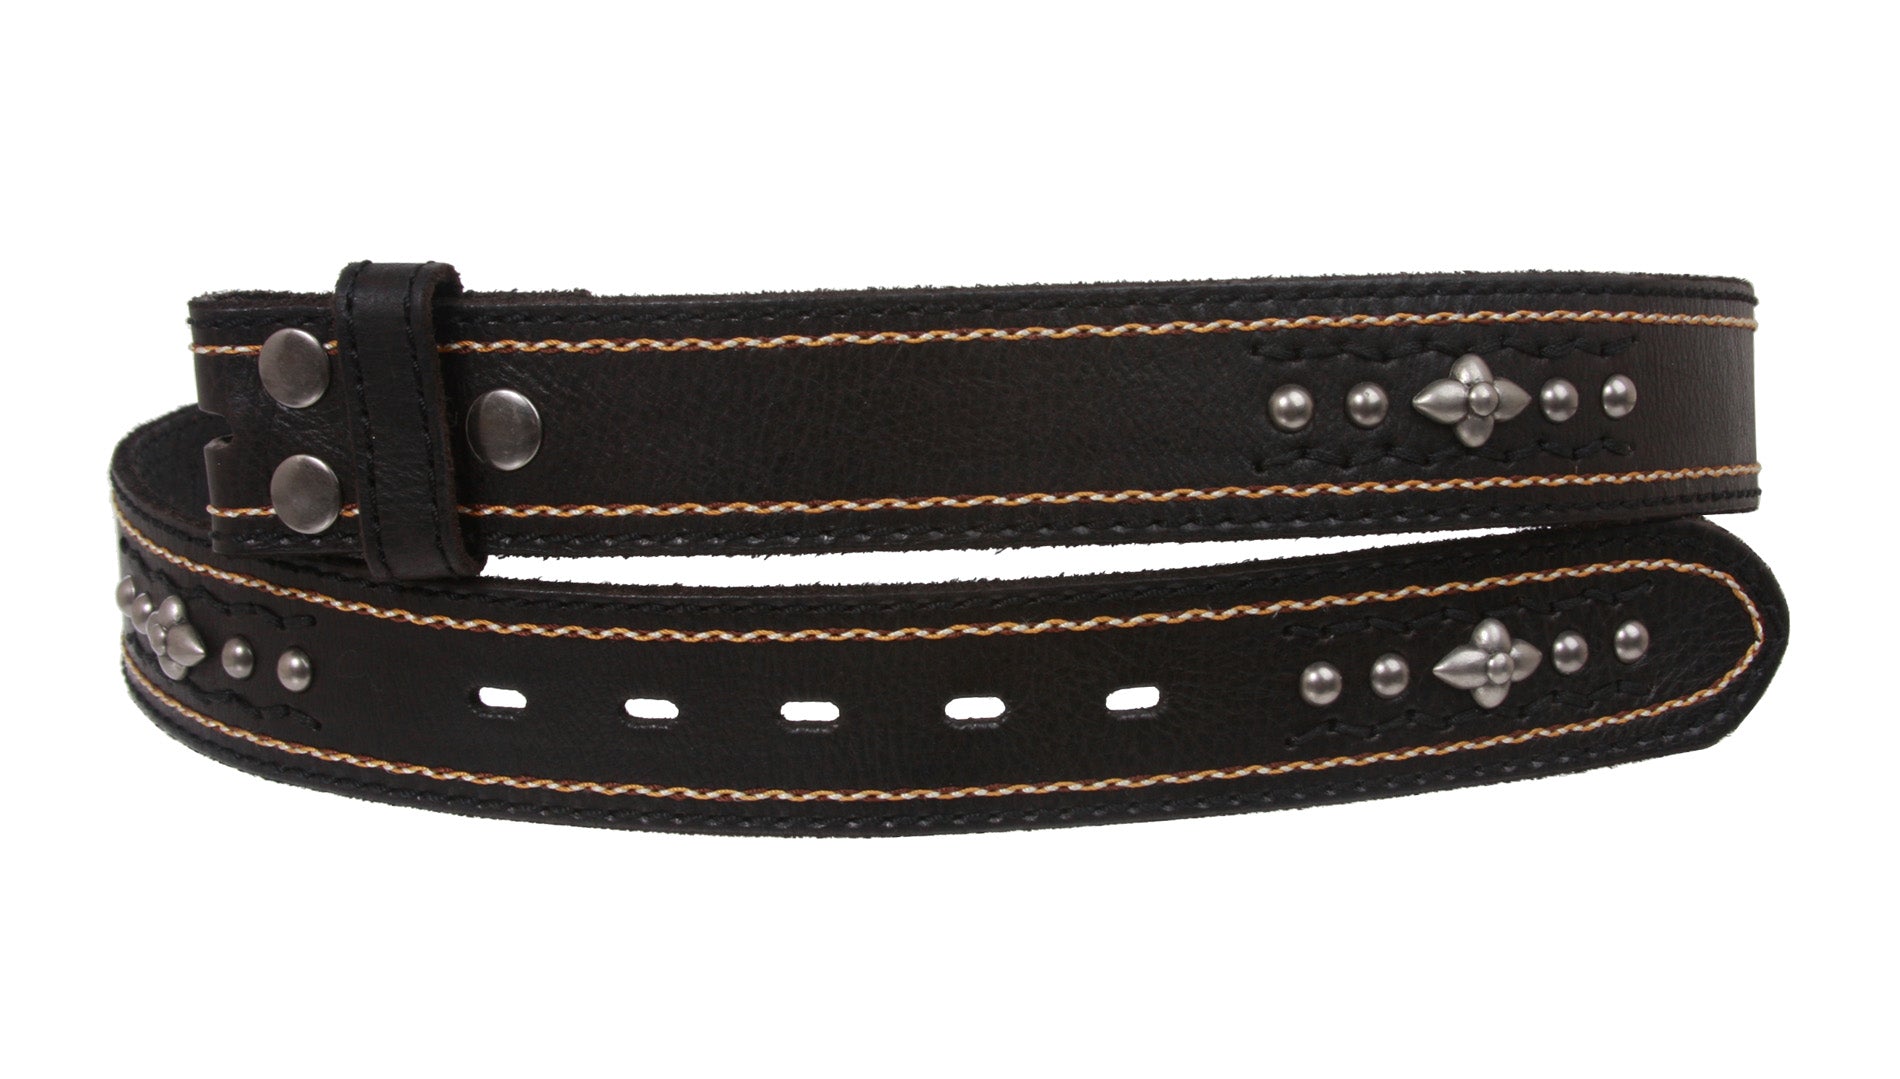 Snap On Stitching-Edged Floral Riveted Studs Cowhide Leather Casual Jean Belt